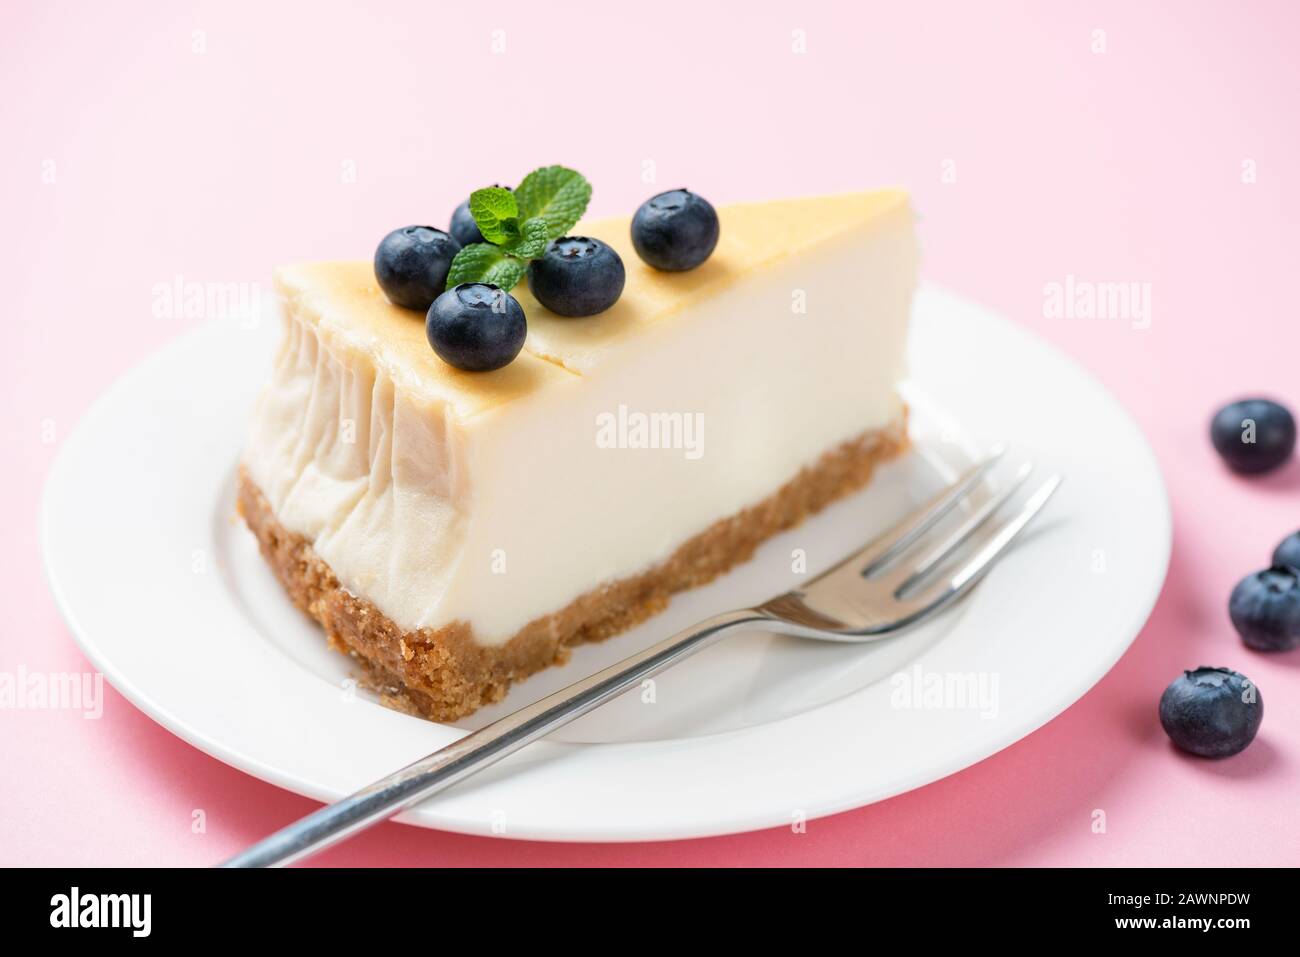 Slice of plain cheesecake with blueberries over pink background Stock Photo